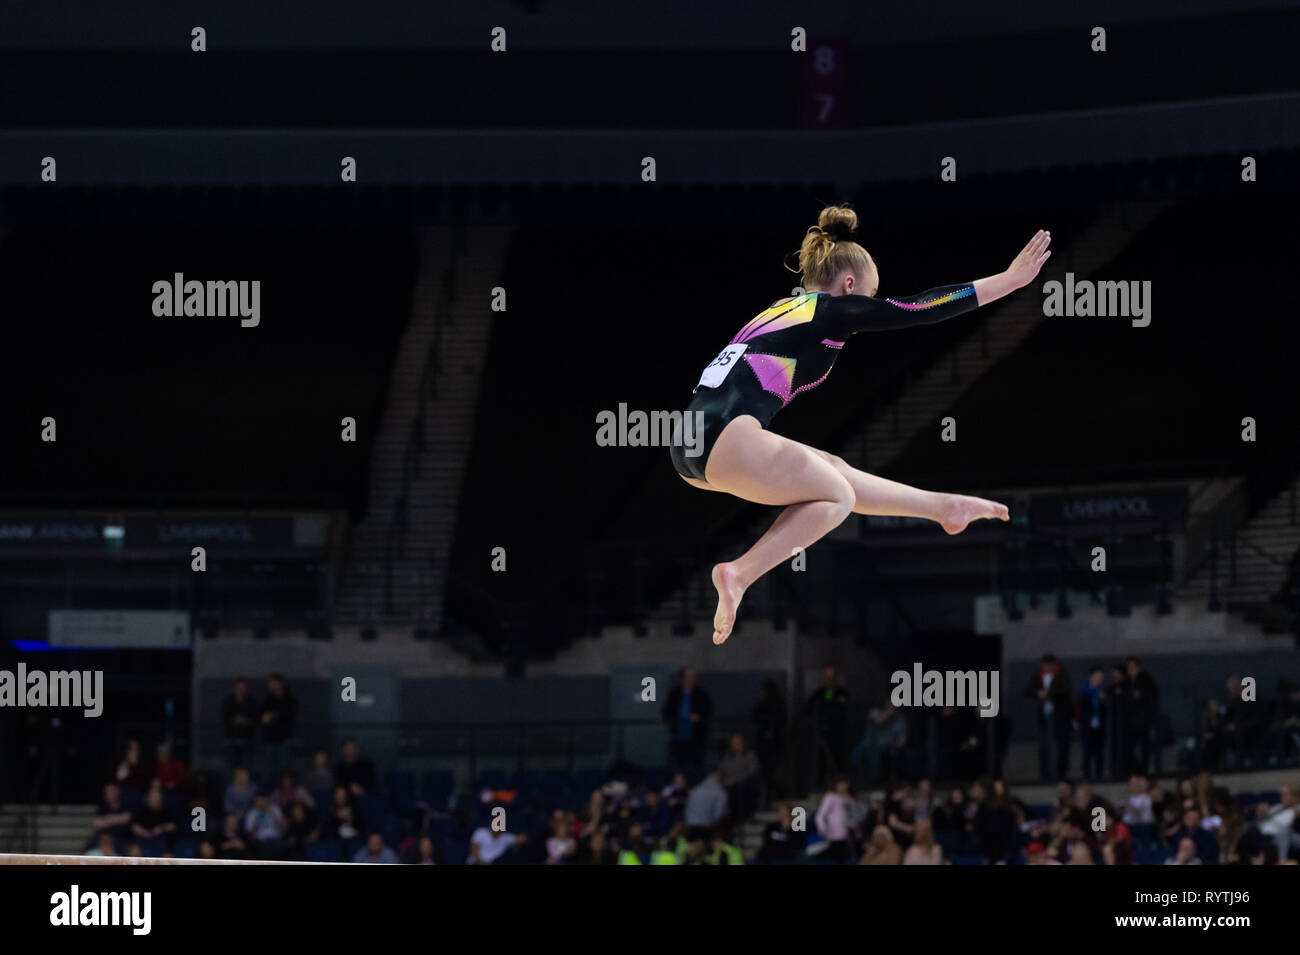 Liverpool, UK. 15th Mar, 2019. Lexie-Mae Neal of Abingdon Gymnastics Club competing during the beam rotation at the Men's and Women's Artistic British Championships 2019, M&S Bank Arena, Liverpool, UK. Credit: Iain Scott Photography/Alamy Live News Stock Photo